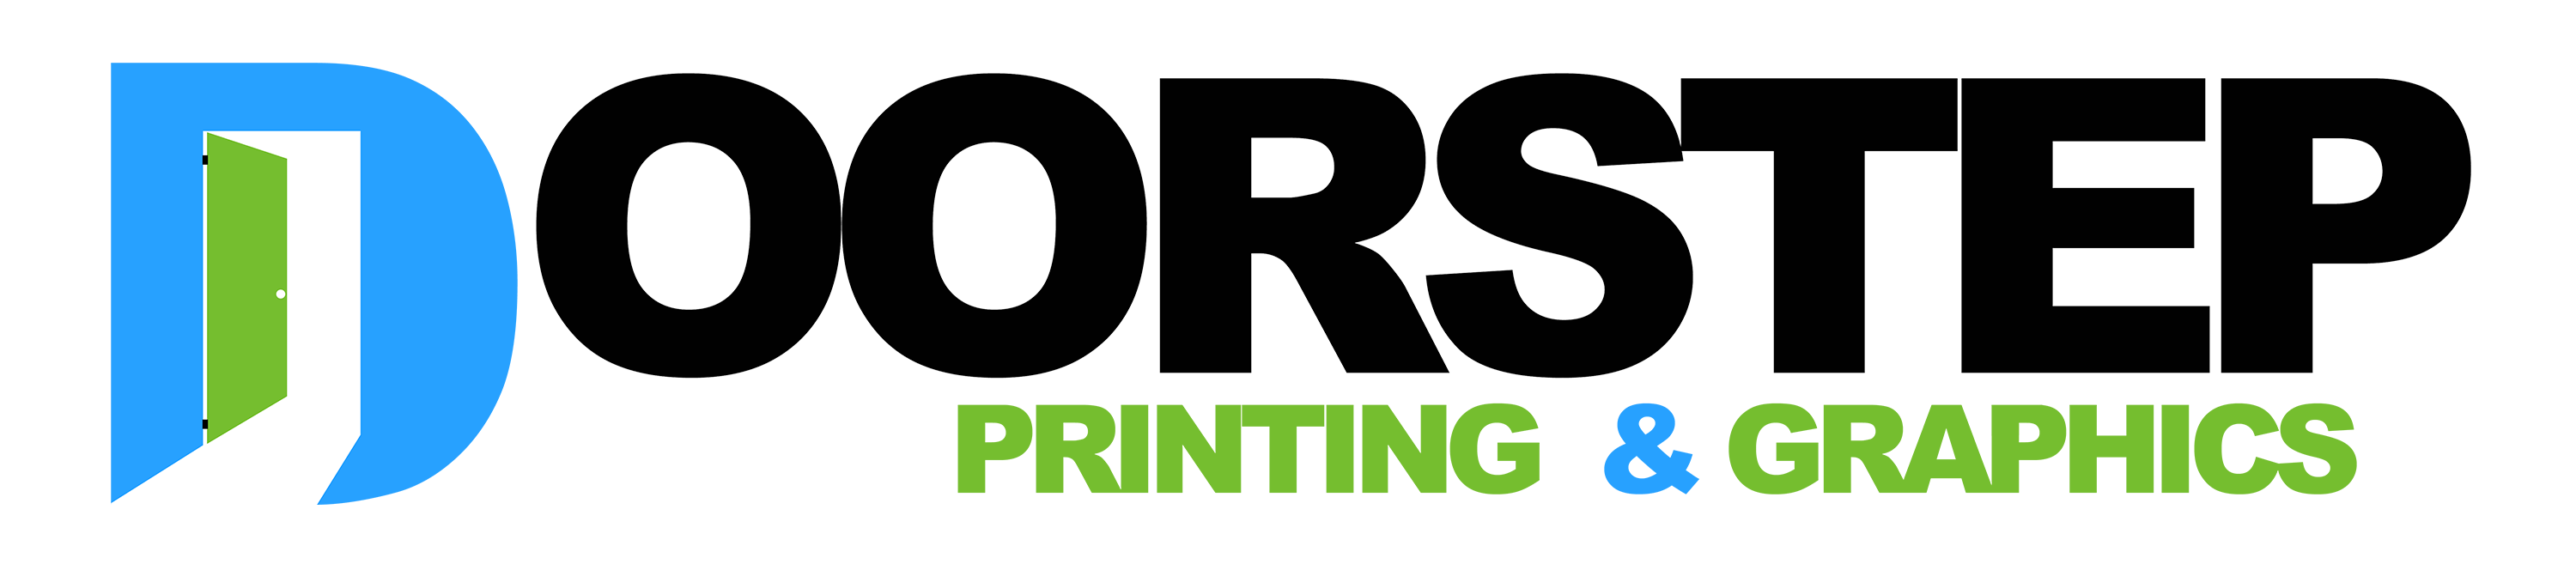 Detroit's Printshop: Business Cards, Signage, Obituaries, Marketing, T-shirts, Corporate Printing, Banners, Signage, Flyers, Buttons & more